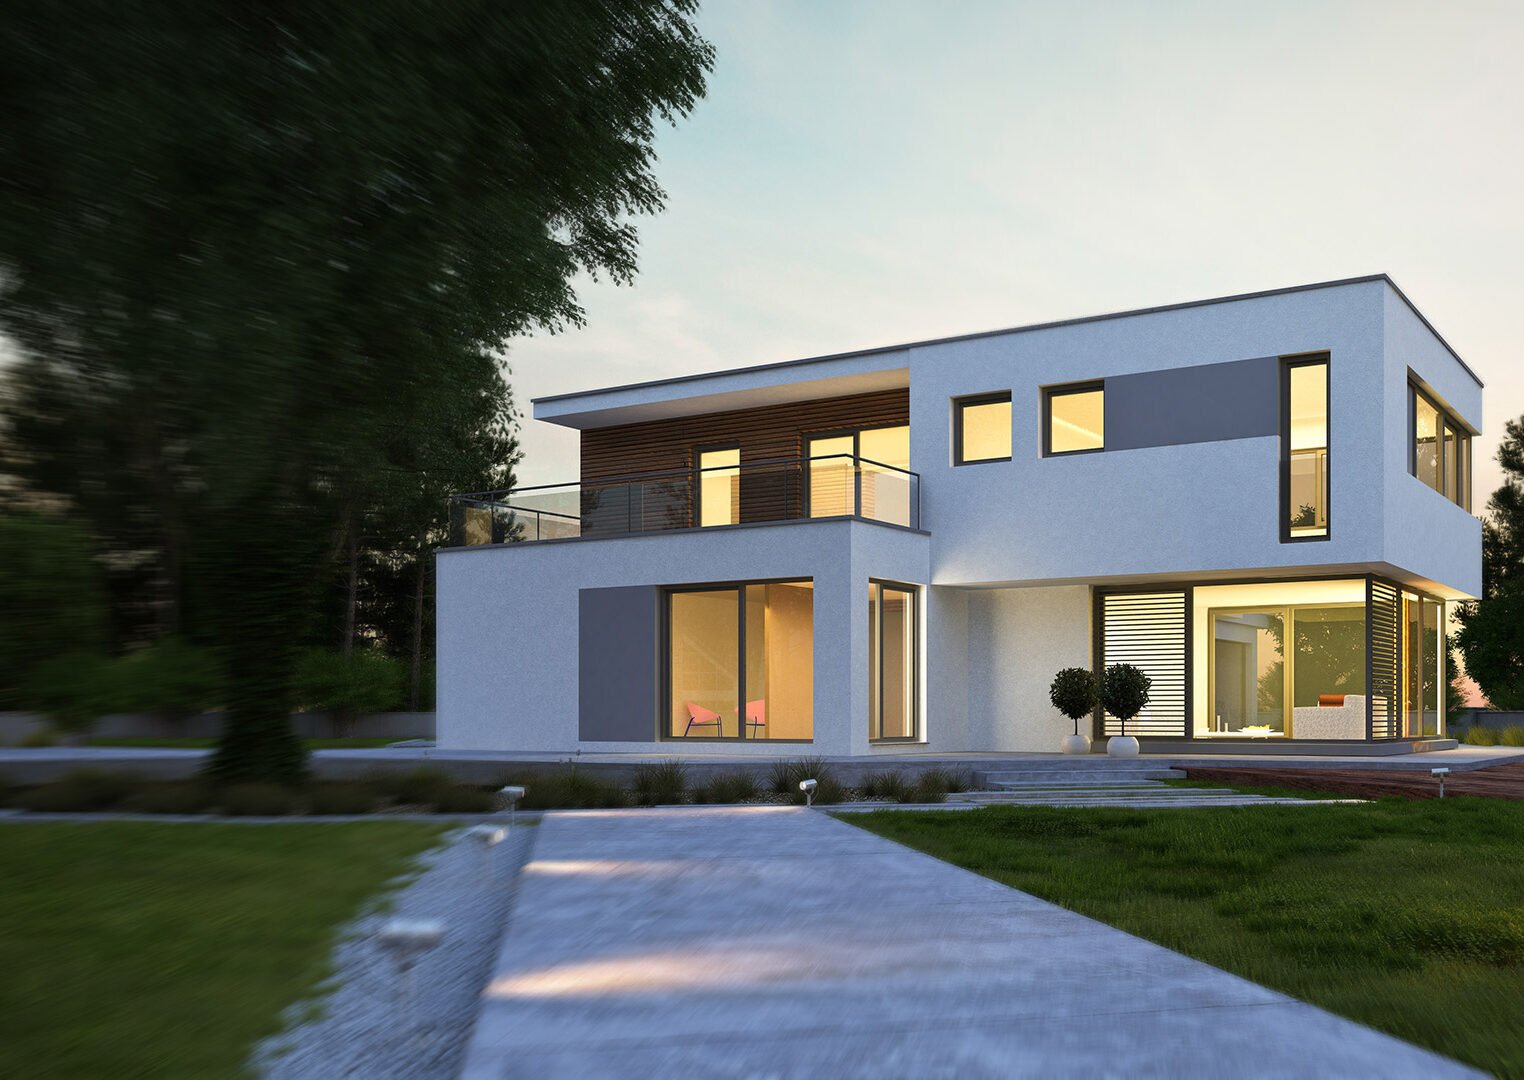 Photo of a modern house in the evening.